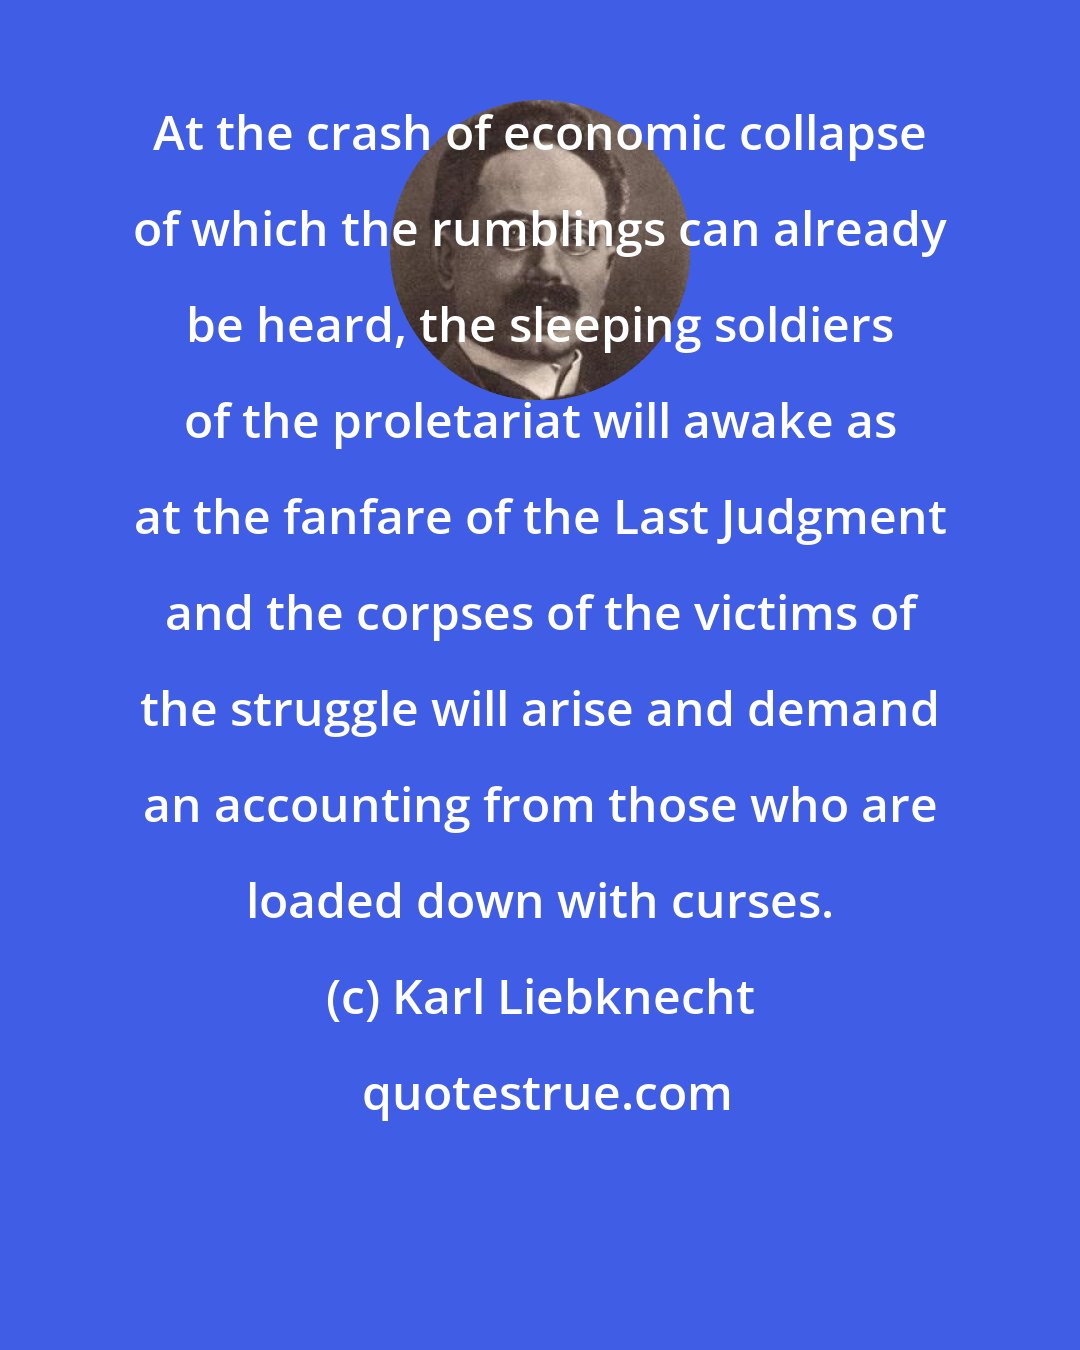 Karl Liebknecht: At the crash of economic collapse of which the rumblings can already be heard, the sleeping soldiers of the proletariat will awake as at the fanfare of the Last Judgment and the corpses of the victims of the struggle will arise and demand an accounting from those who are loaded down with curses.